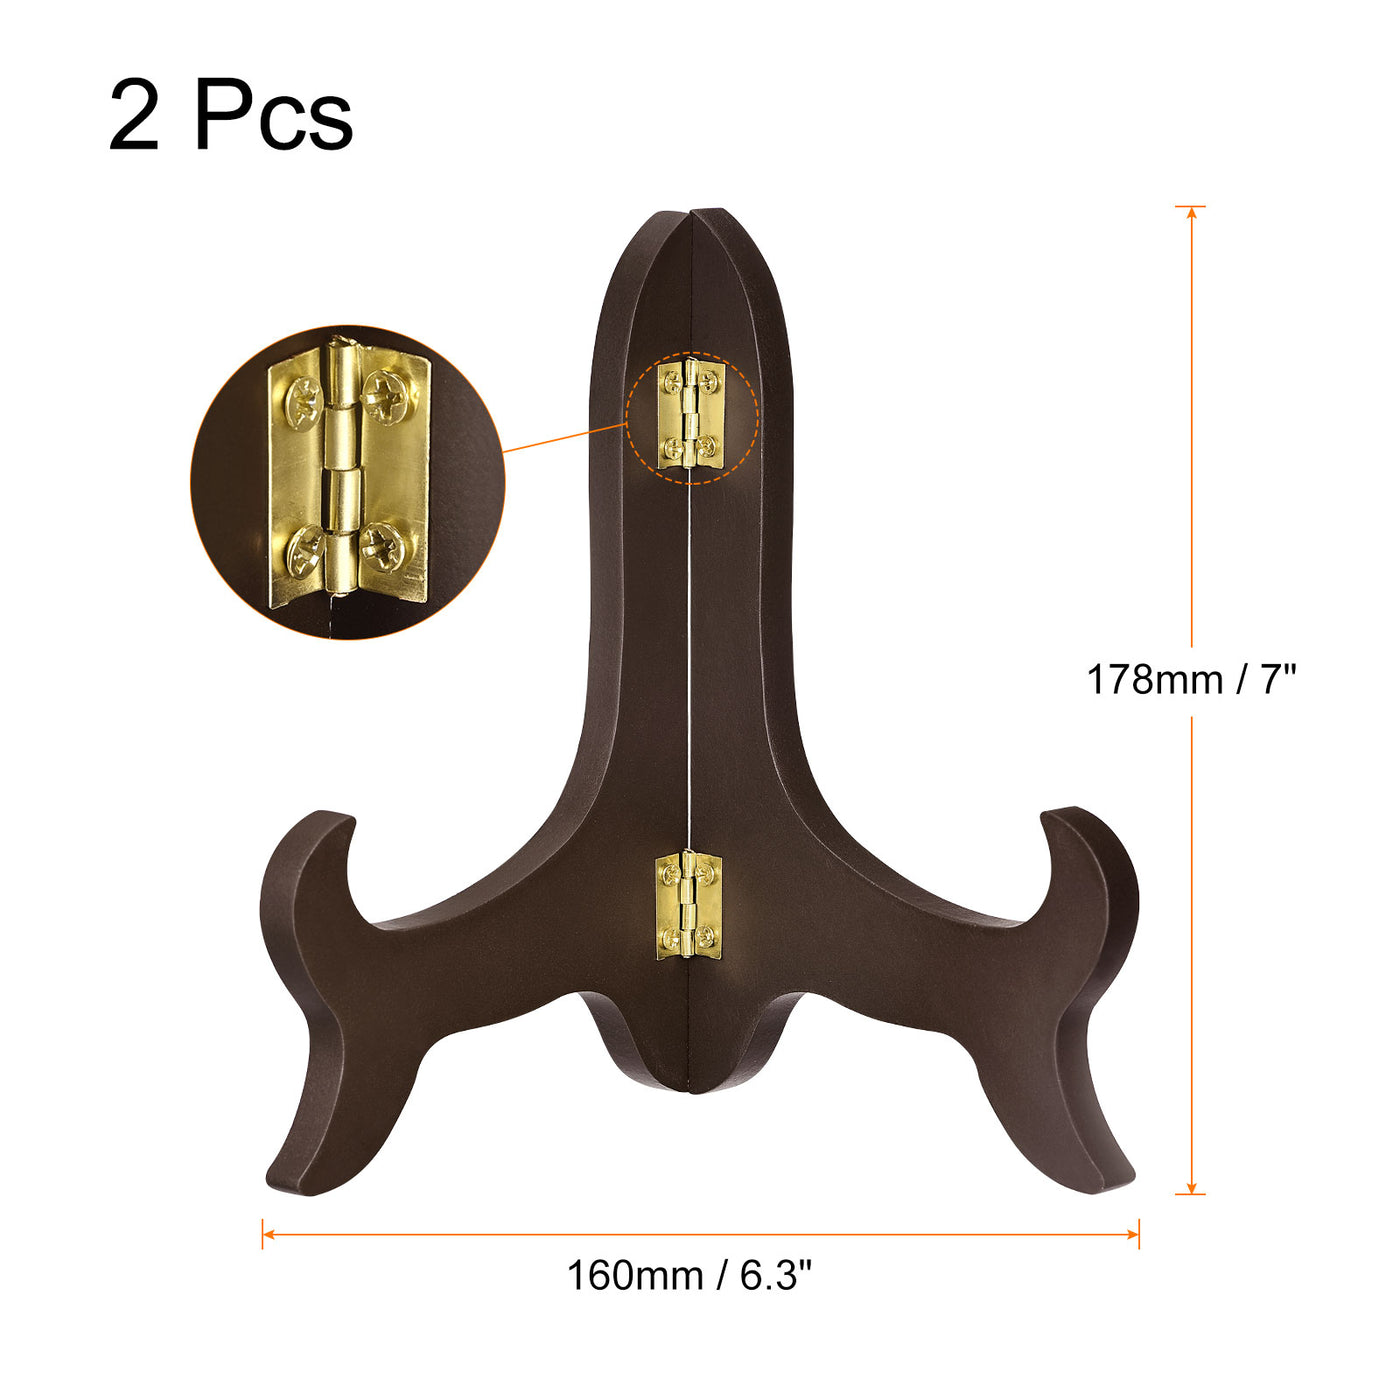 uxcell Uxcell 2pcs 7" Easel Plate Holder, Wooden Folding Display Stand Brown for Decorative Picture Frame